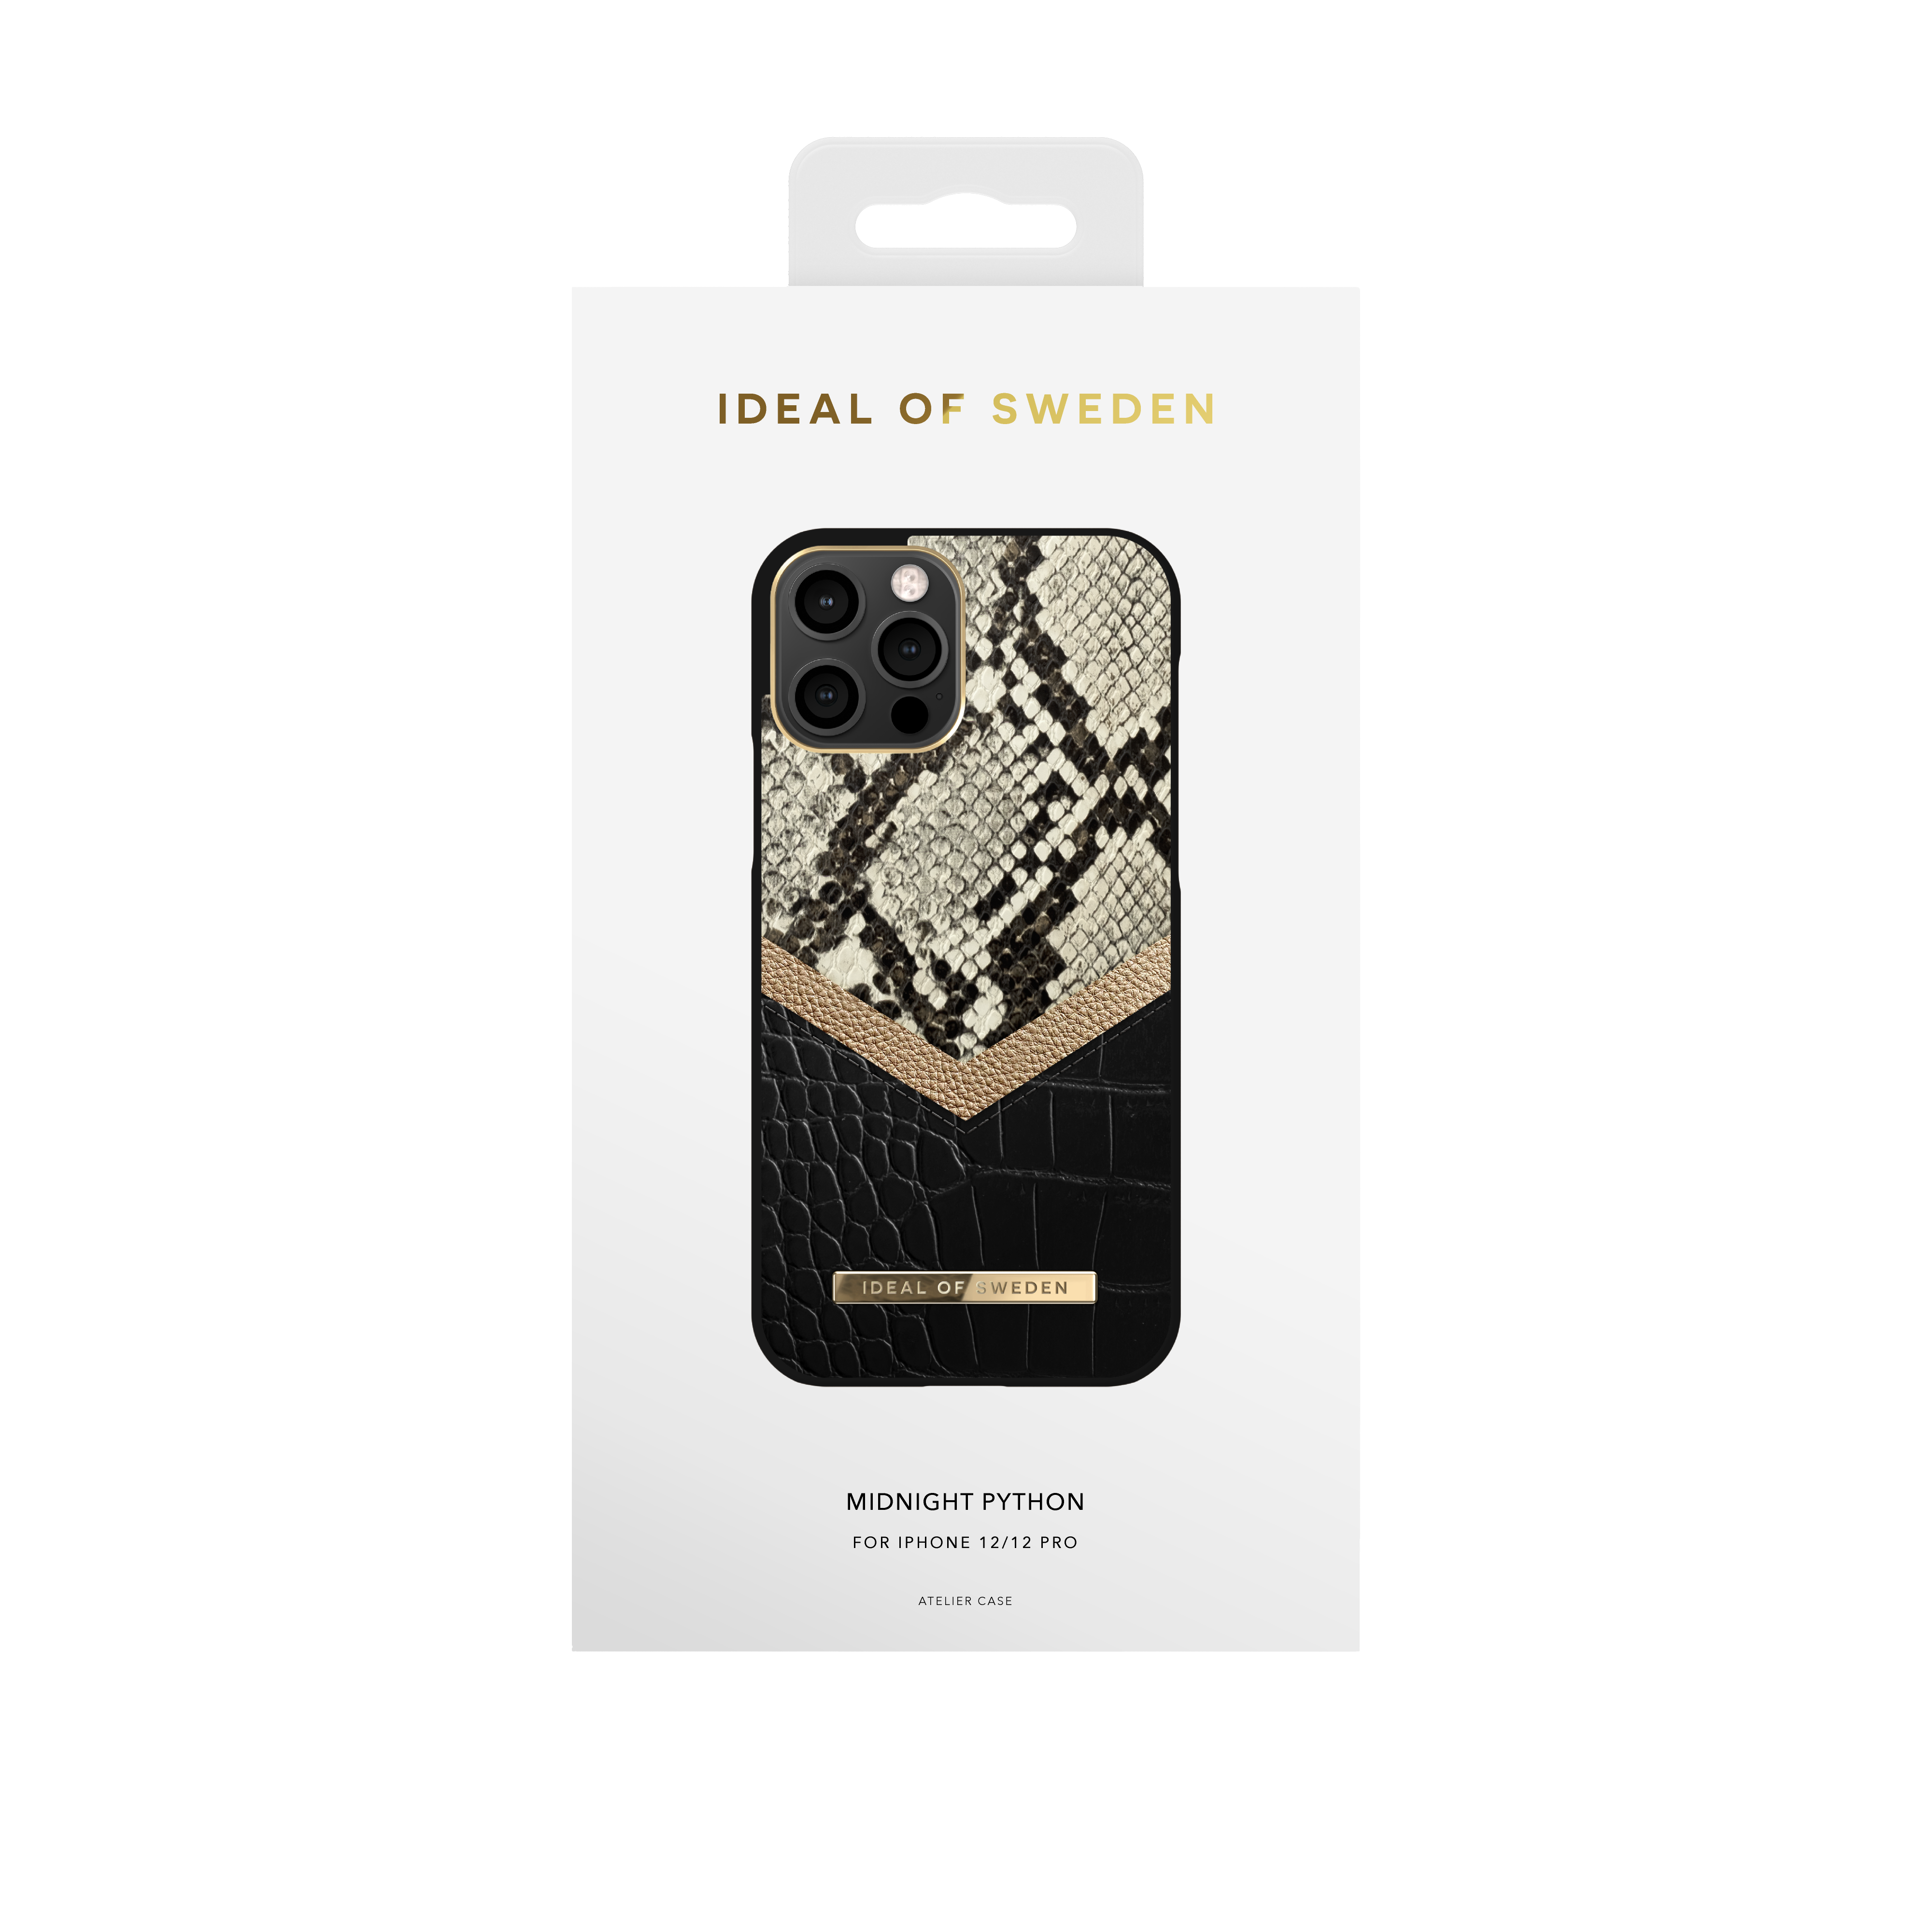 IDEAL OF SWEDEN IDACSS20-I2061-199, Backcover, Pro, iPhone 12 12, Apple, Python iPhone Midnight